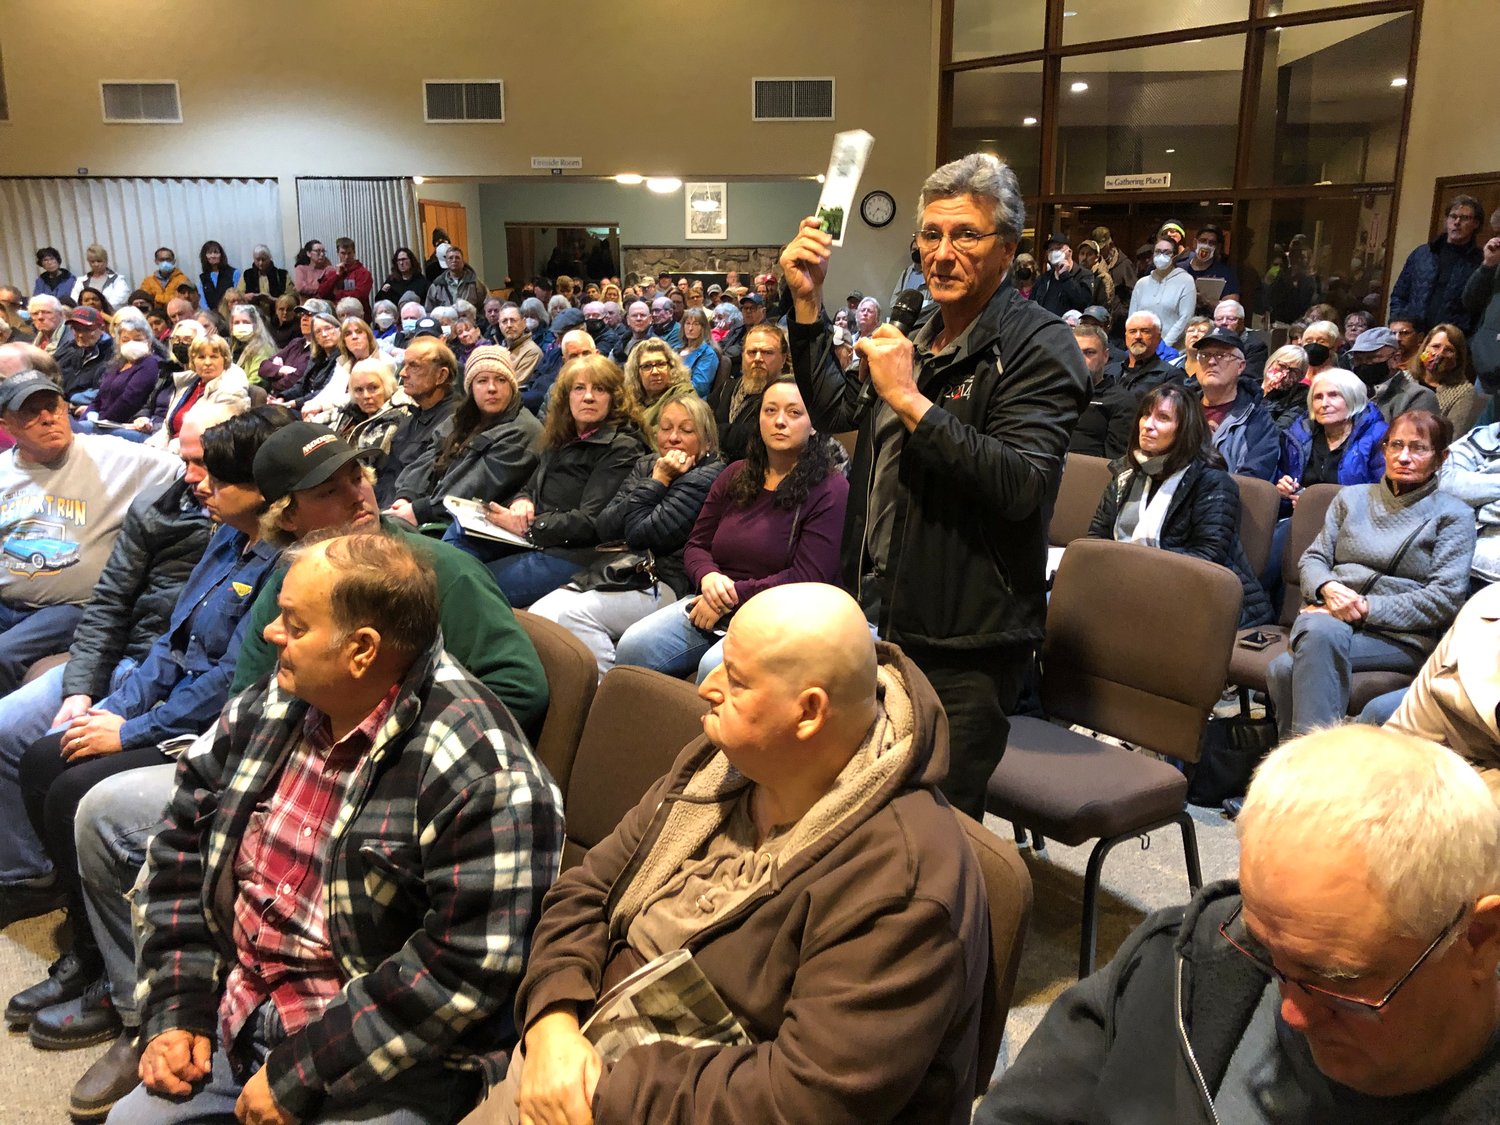 Thane Bryenton, co-owner of Evergreen Valley Lavender Farm, was one of 37 people who spoke in opposition to building a new commercial airport in central Thurston County at a meeting on November 14, 2022.